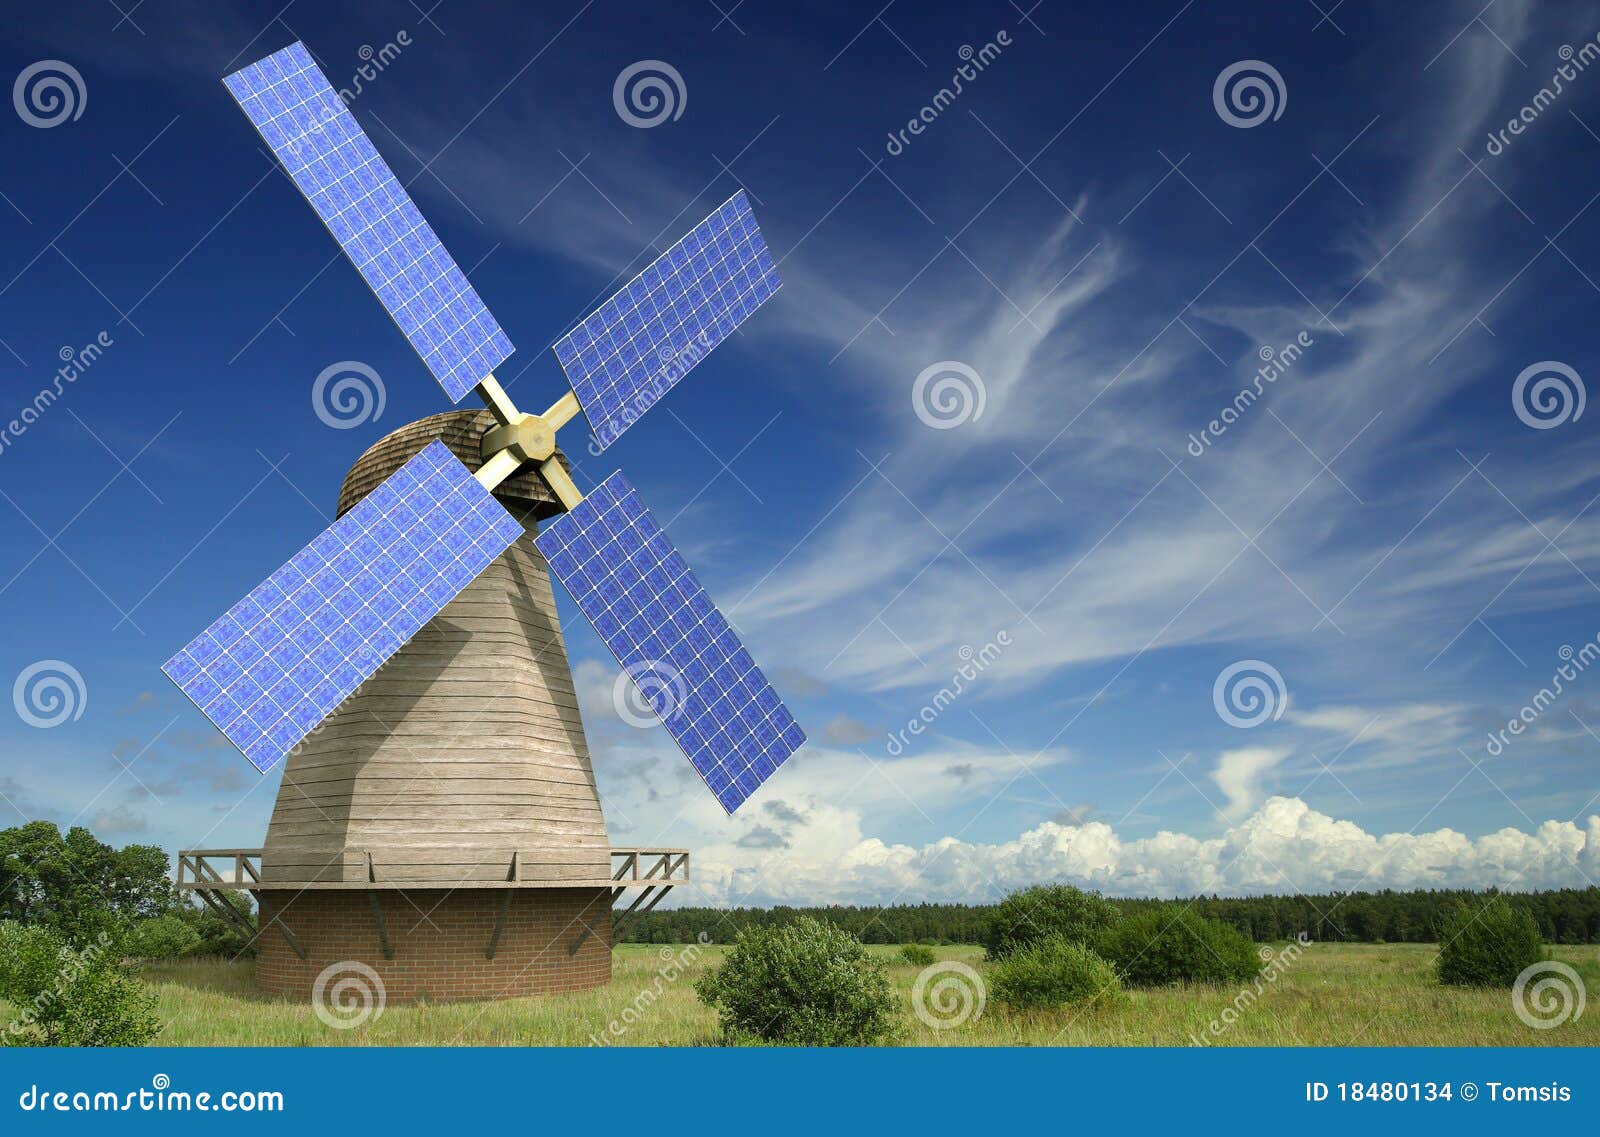 Old Windmill With Solar Panels On Its Wings Stock Images - Image 